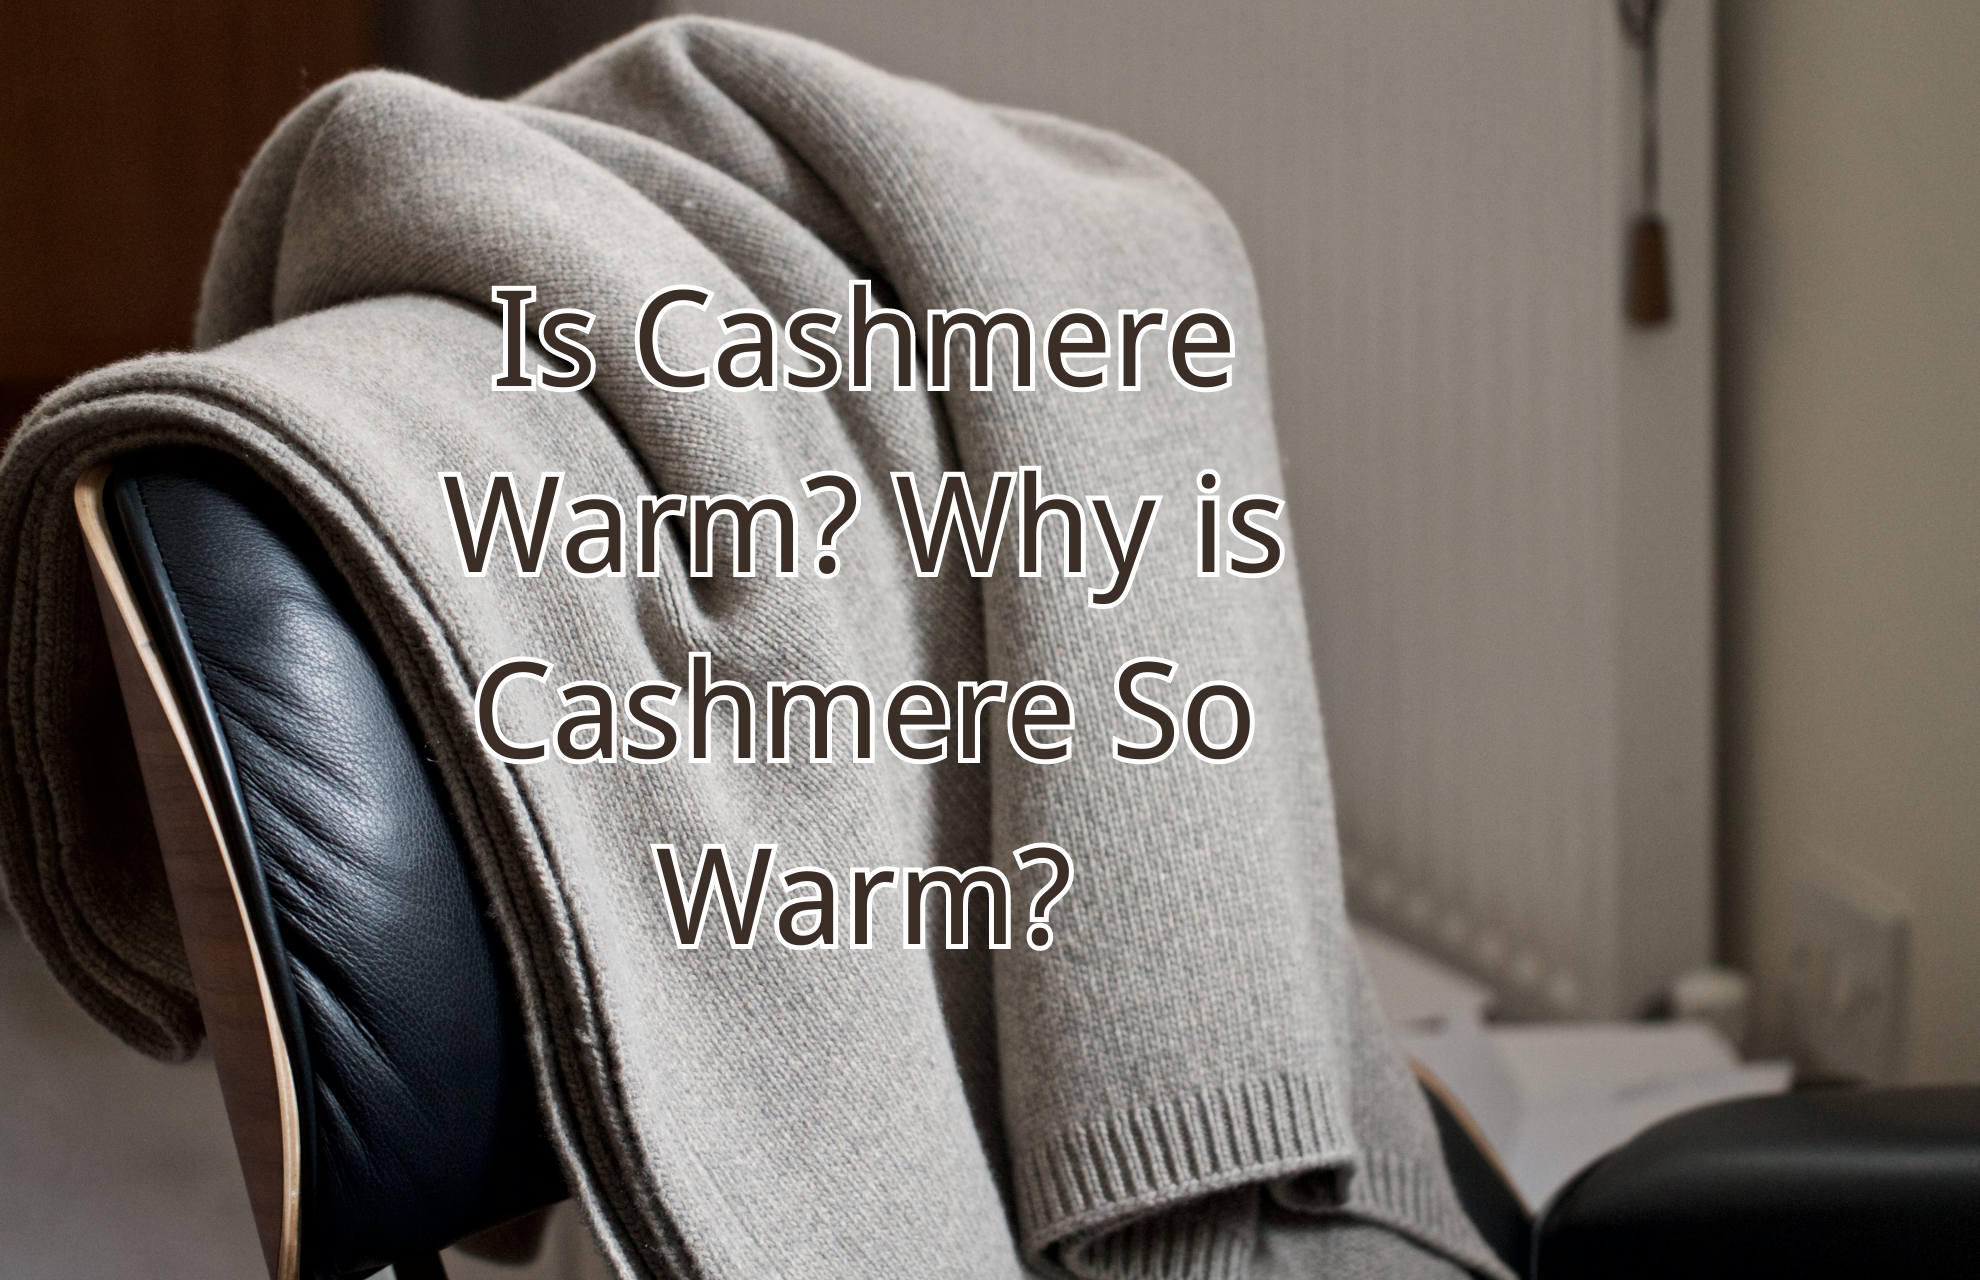 Is Cashmere Warm? Why is Cashmere So Warm?